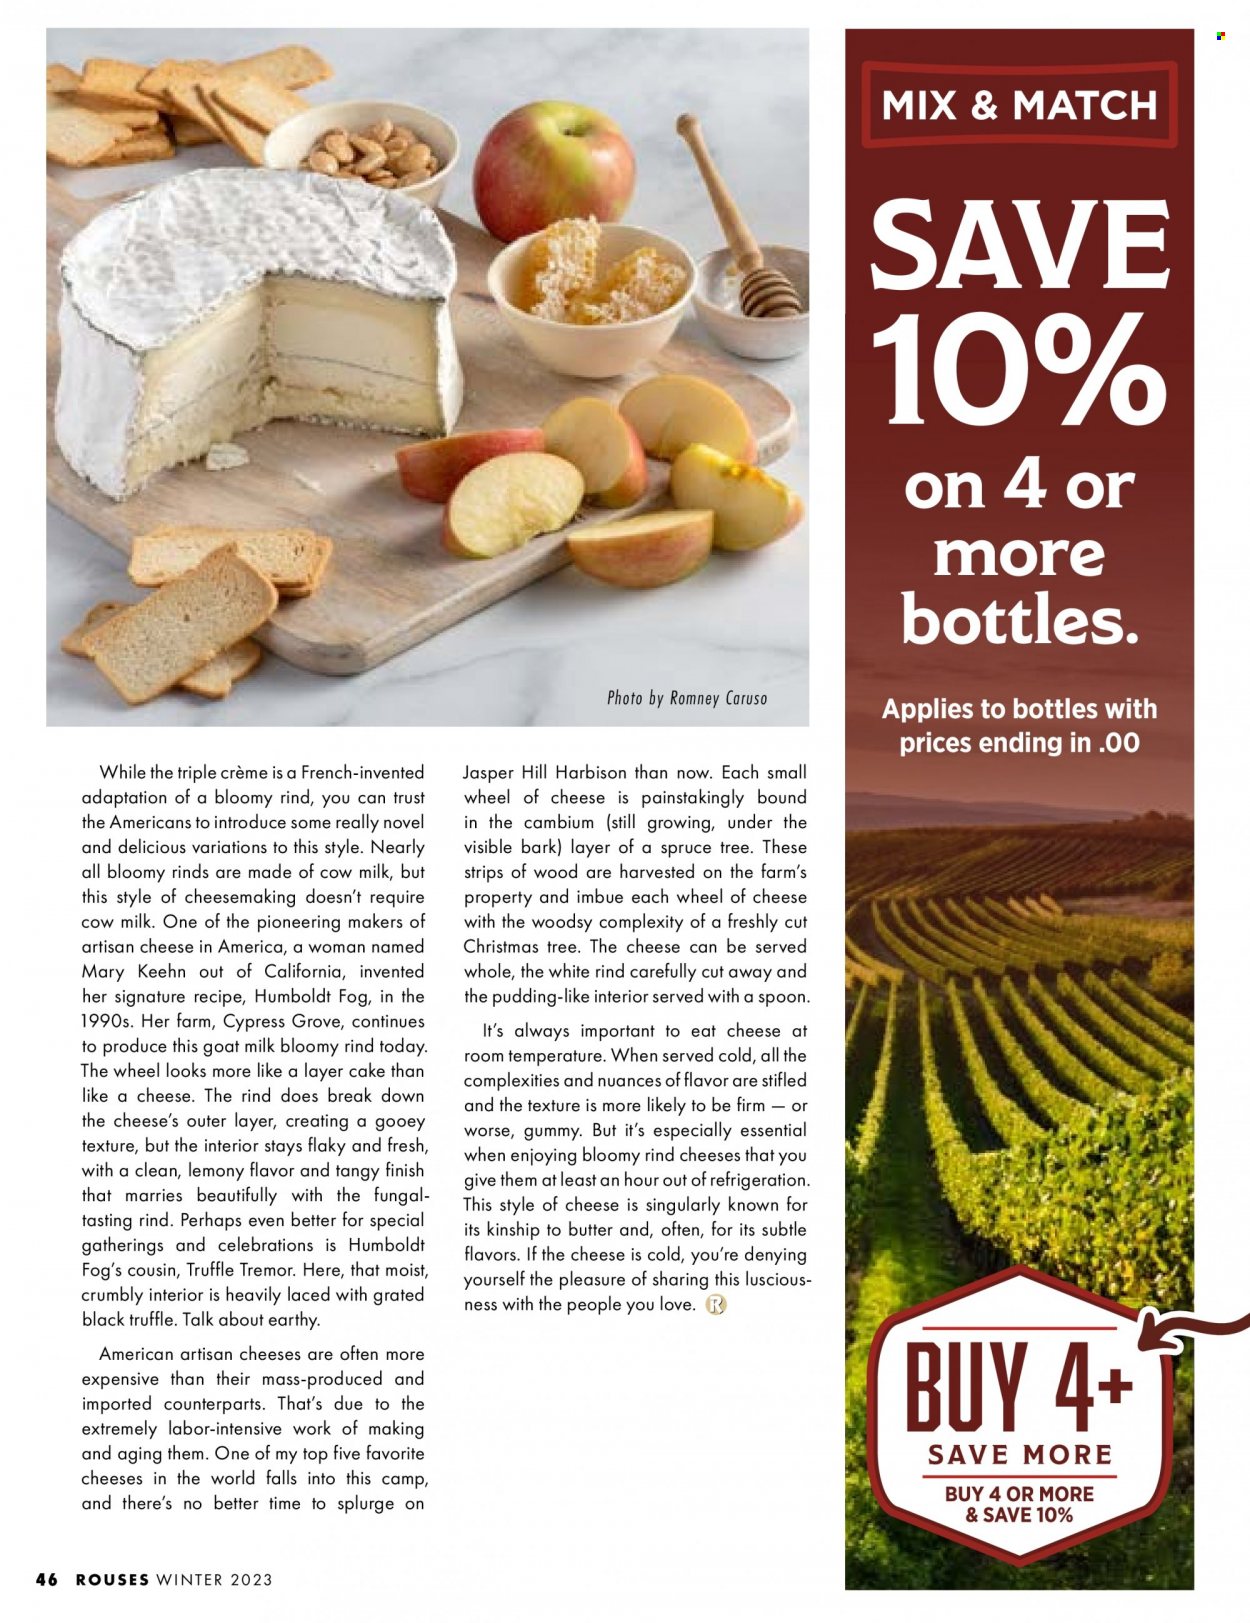 Rouses Markets ad .